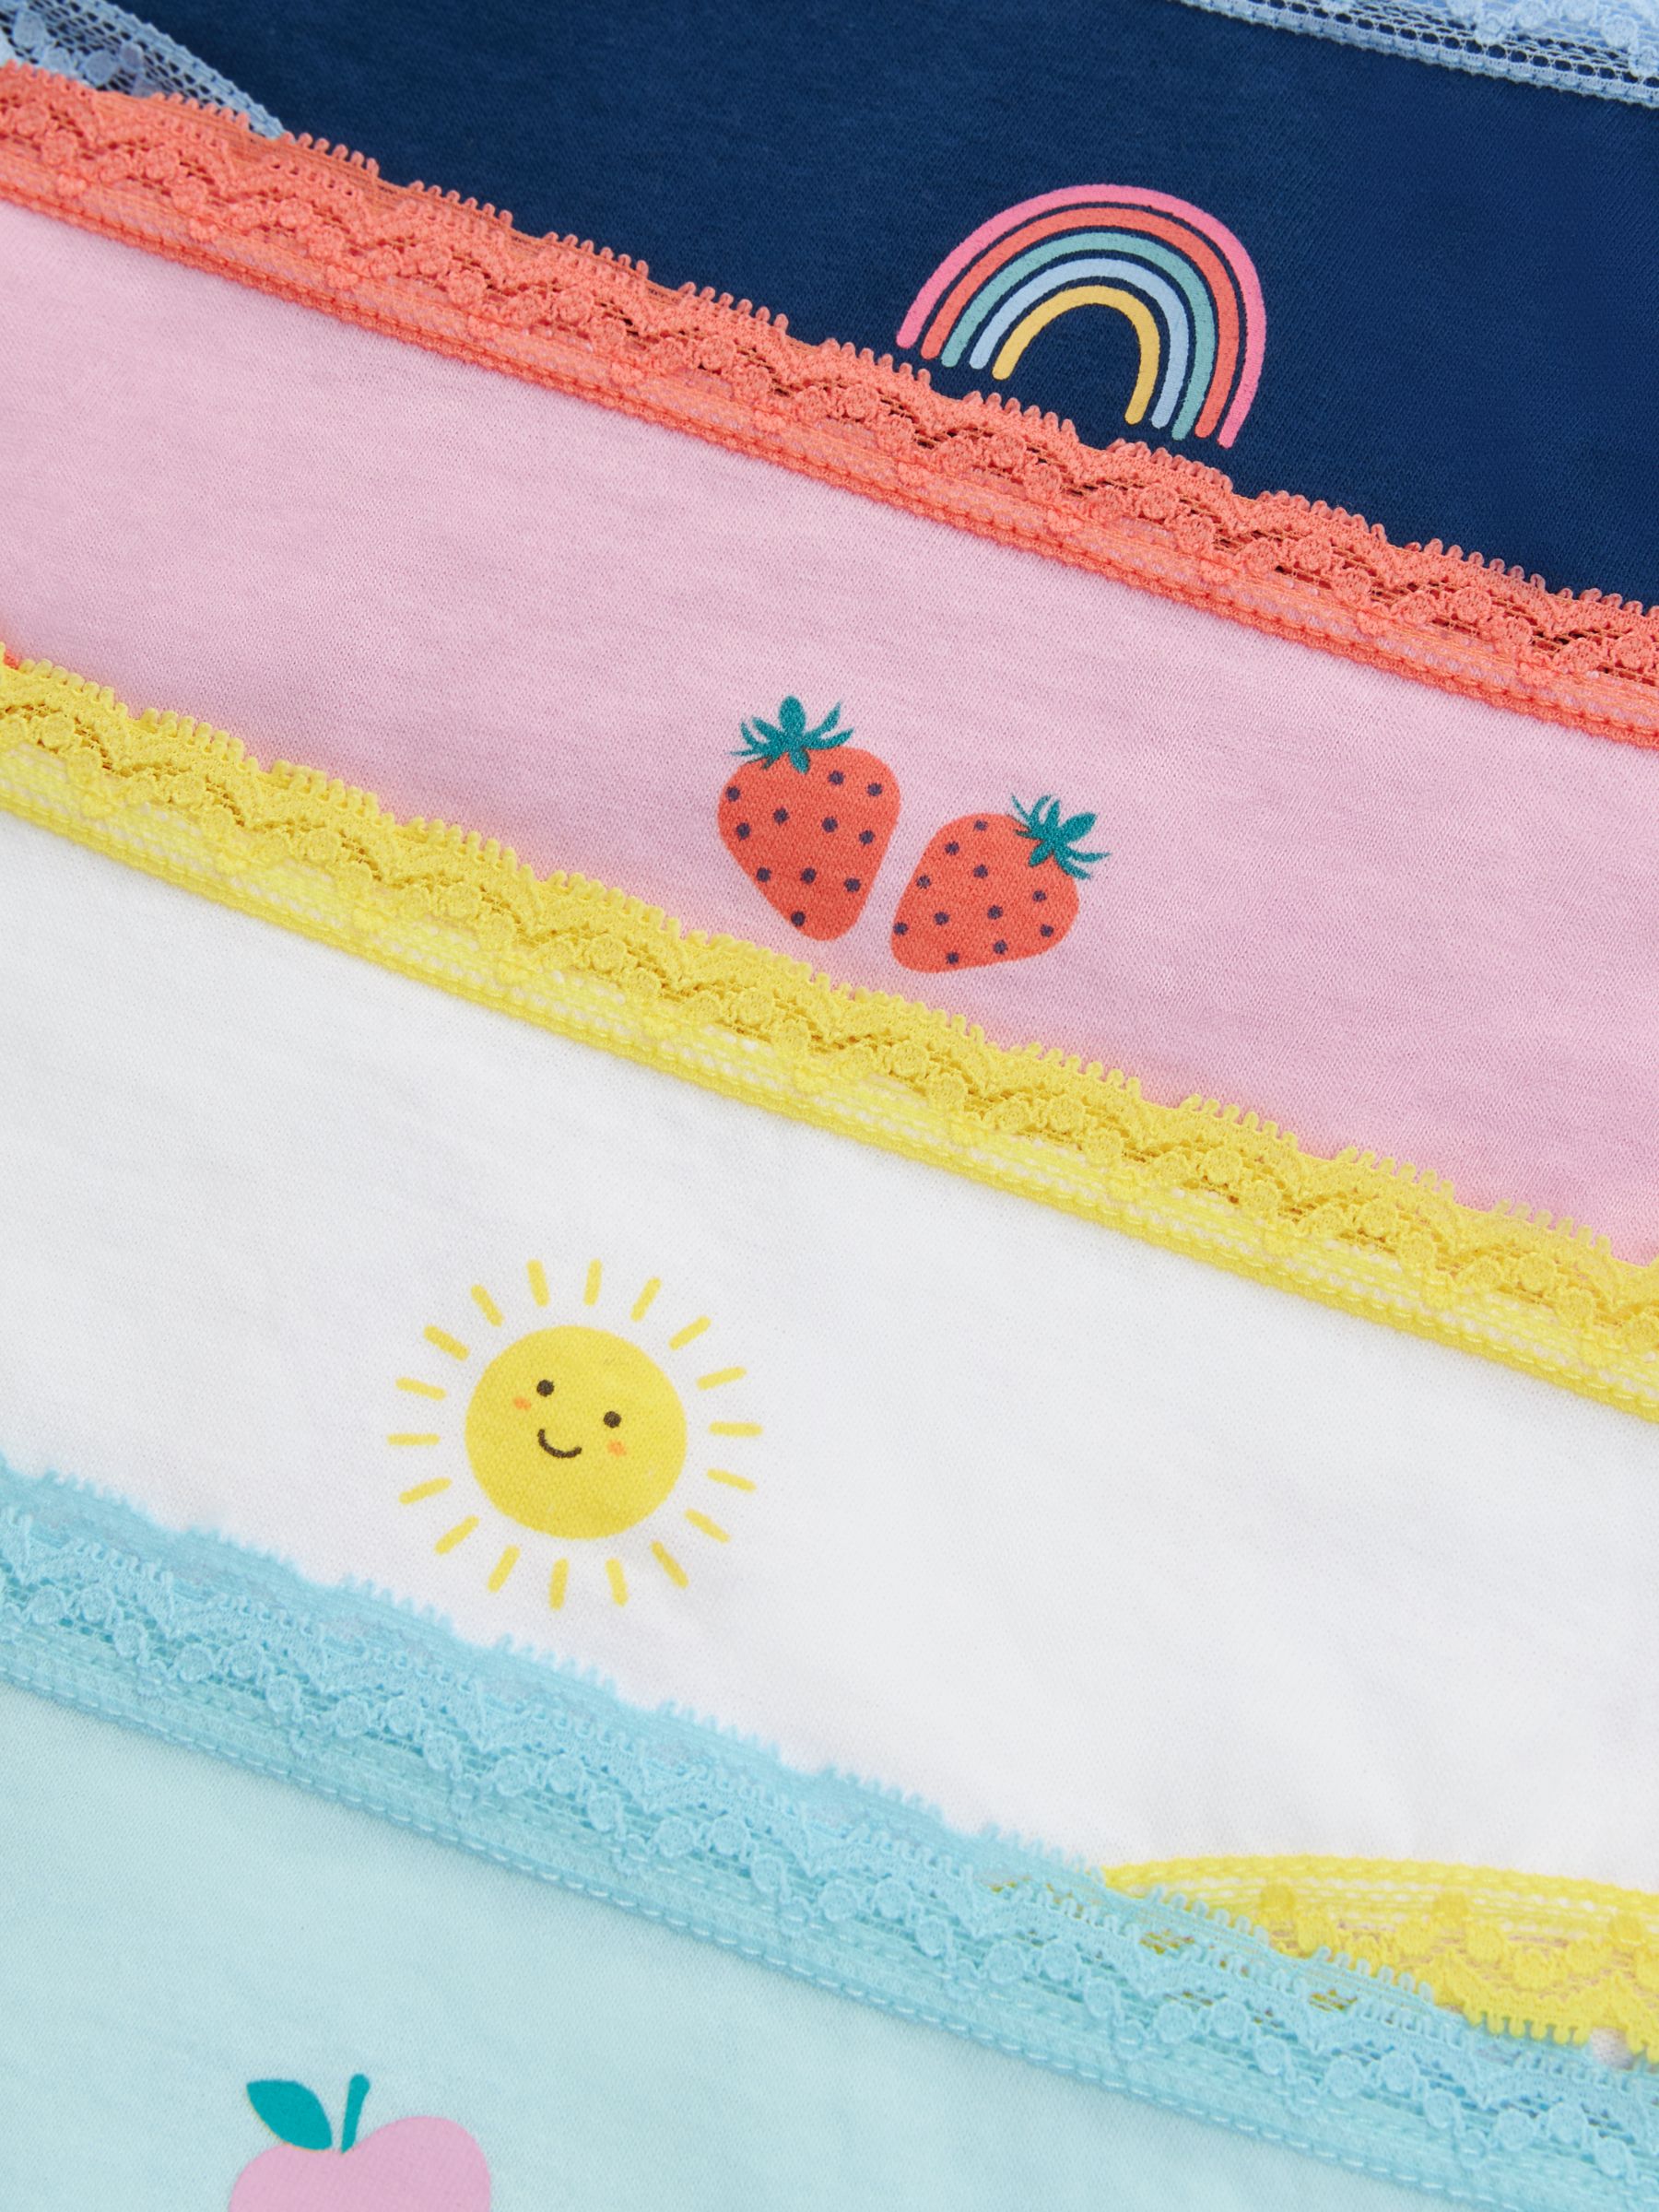 John Lewis Kids' Sunny Fruit Lace Trim Knickers, Pack of 5, Multi, 2 years